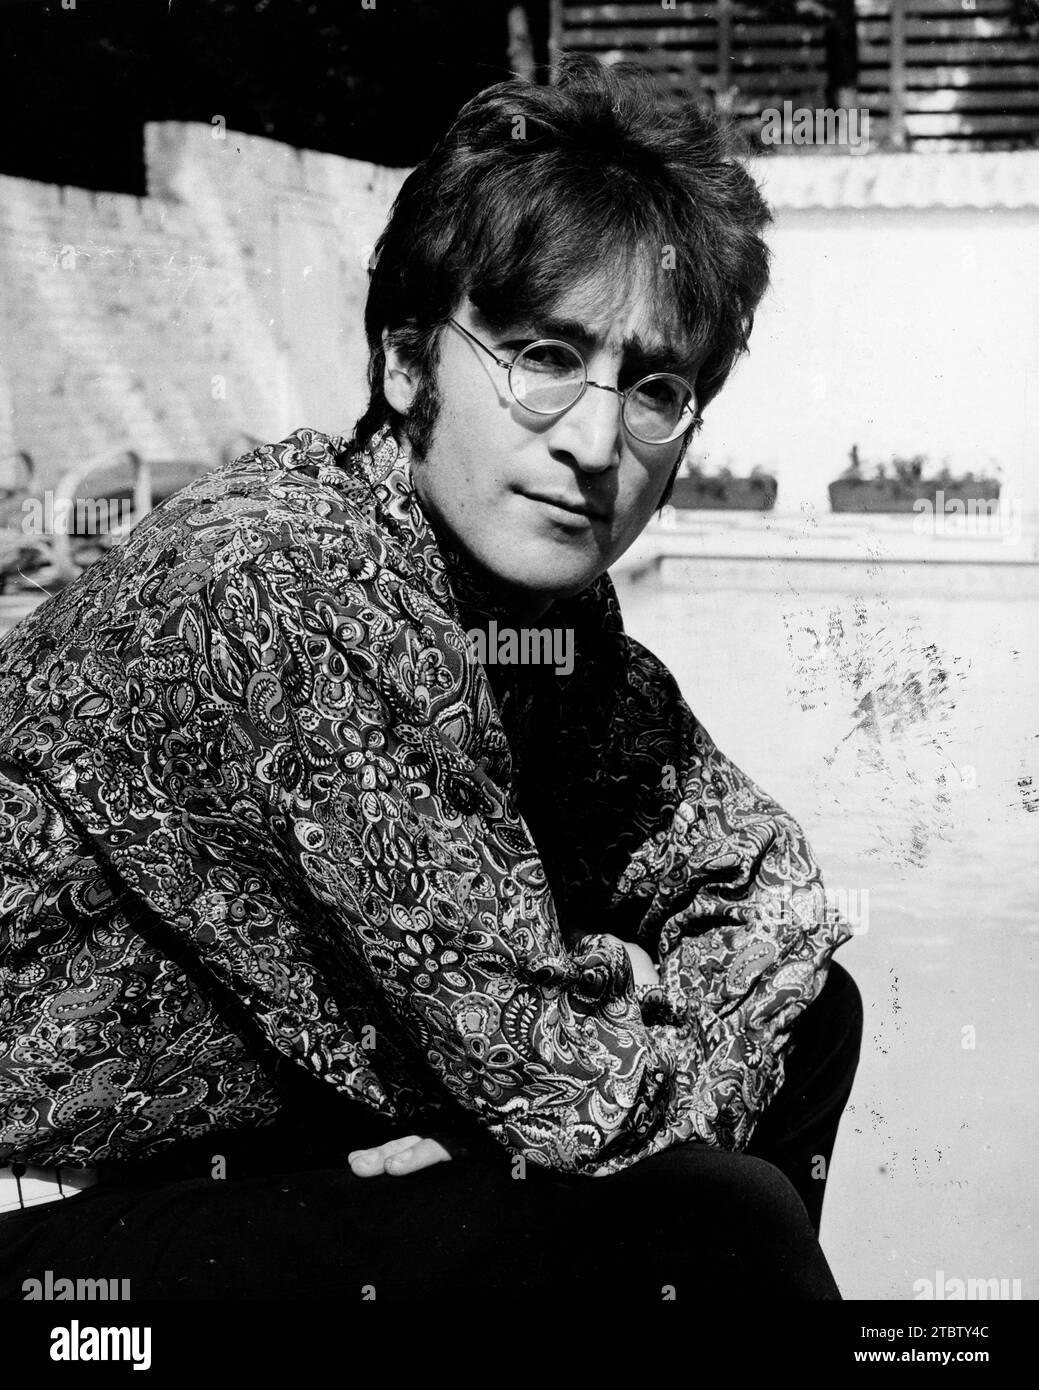 July 24, 1968 - London, England, United Kingdom - Singer/Songwriter JOHN LENNON (1940-1980) member of The Beatles relaxing at his home. Today marks the 25th anniversary of the death of JOHN WINSTON LENNON. He was born on Oct. 9th, 1940 in Liverpool and was best known as a singer, songwriter, poet and guitarist for The Beatles. He is recognized as one of the greatest musical icons of the 20th century. On the evening of Dec. 8th, 1980, in New York City, deranged fan Mark David Chapman shot Lennon 4 times in the back and shoulder. Despite extensive resuscitative efforts, Lennon died of shock and Stock Photo